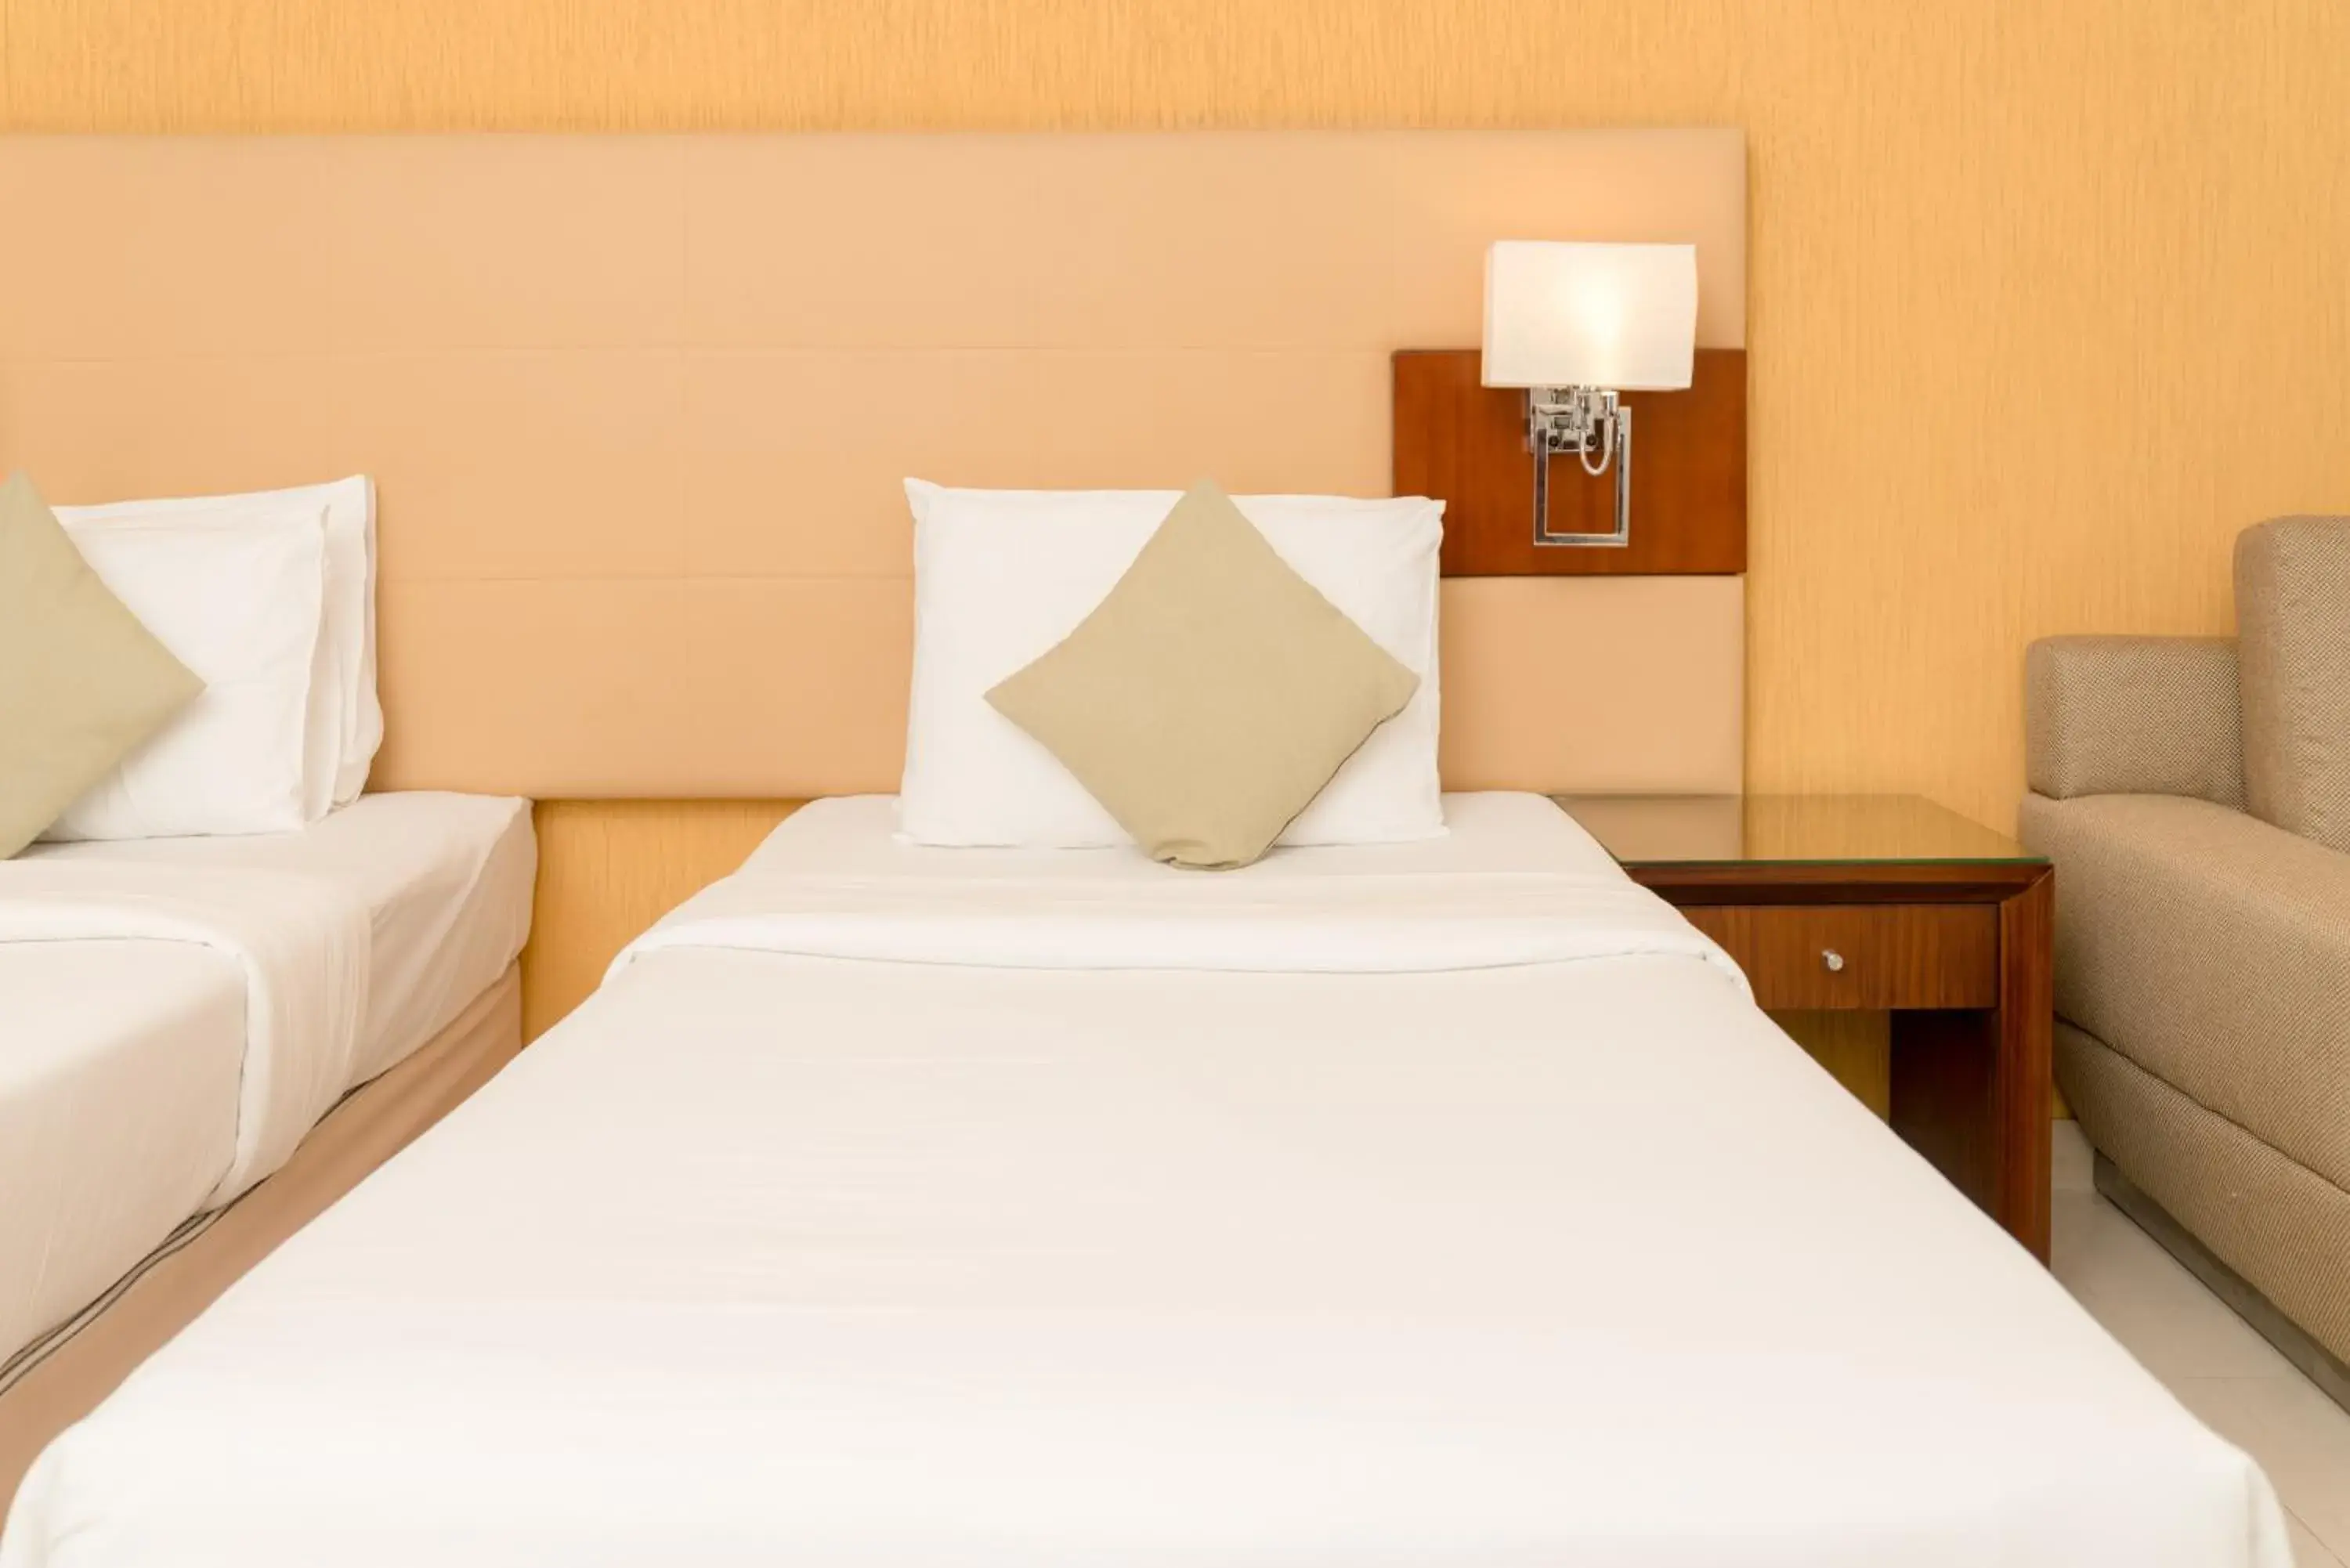 Bed, Room Photo in Star Metro Deira Hotel Apartments